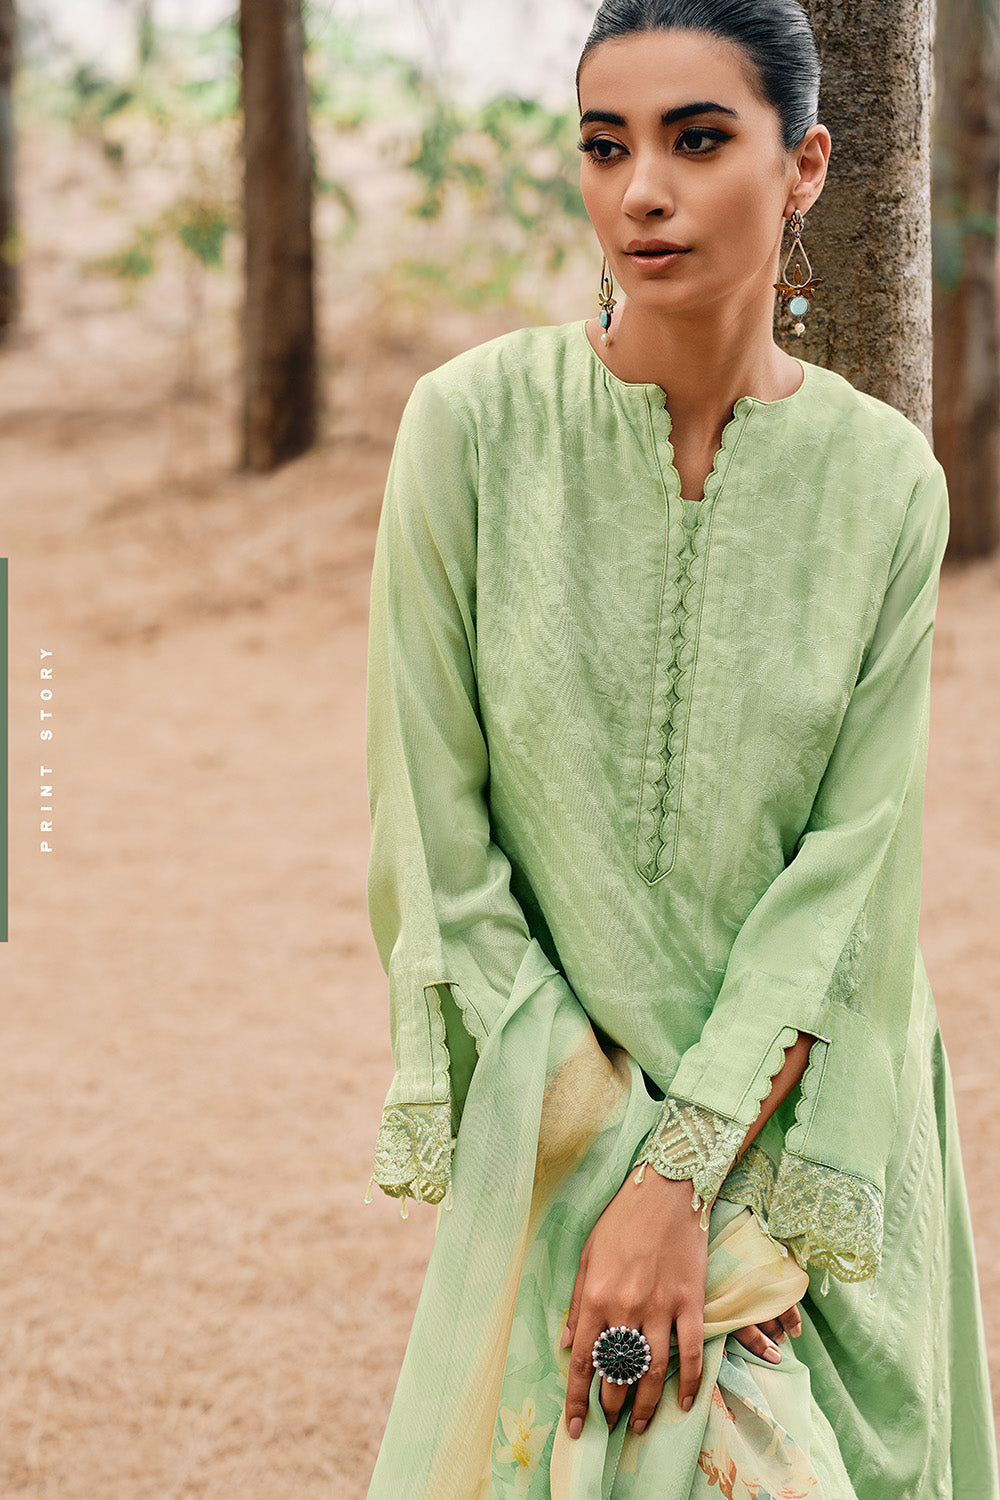 Pista Green Color Muslin Cotton Resham Woven Unstitched Suit Material